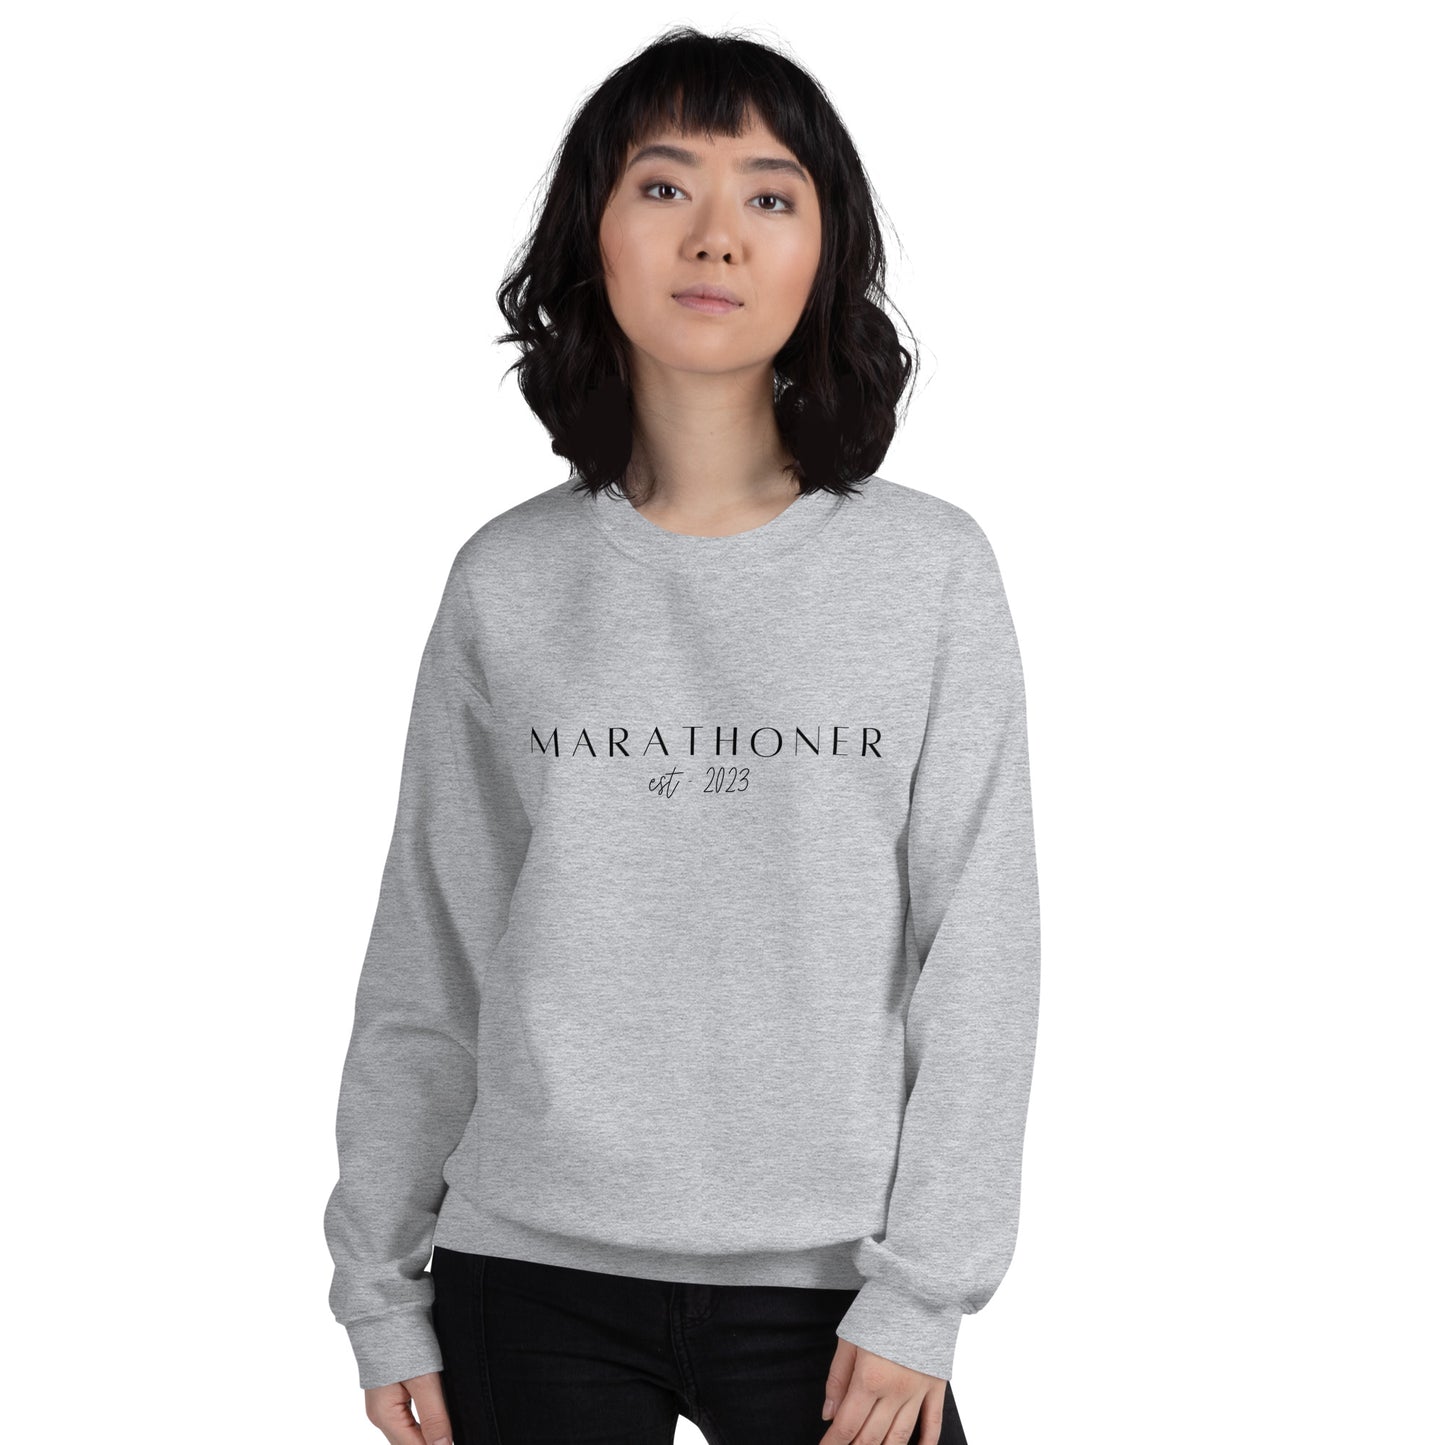 woman wearing a grey sweatshirt with the words Marathoner est 2023 across the chest